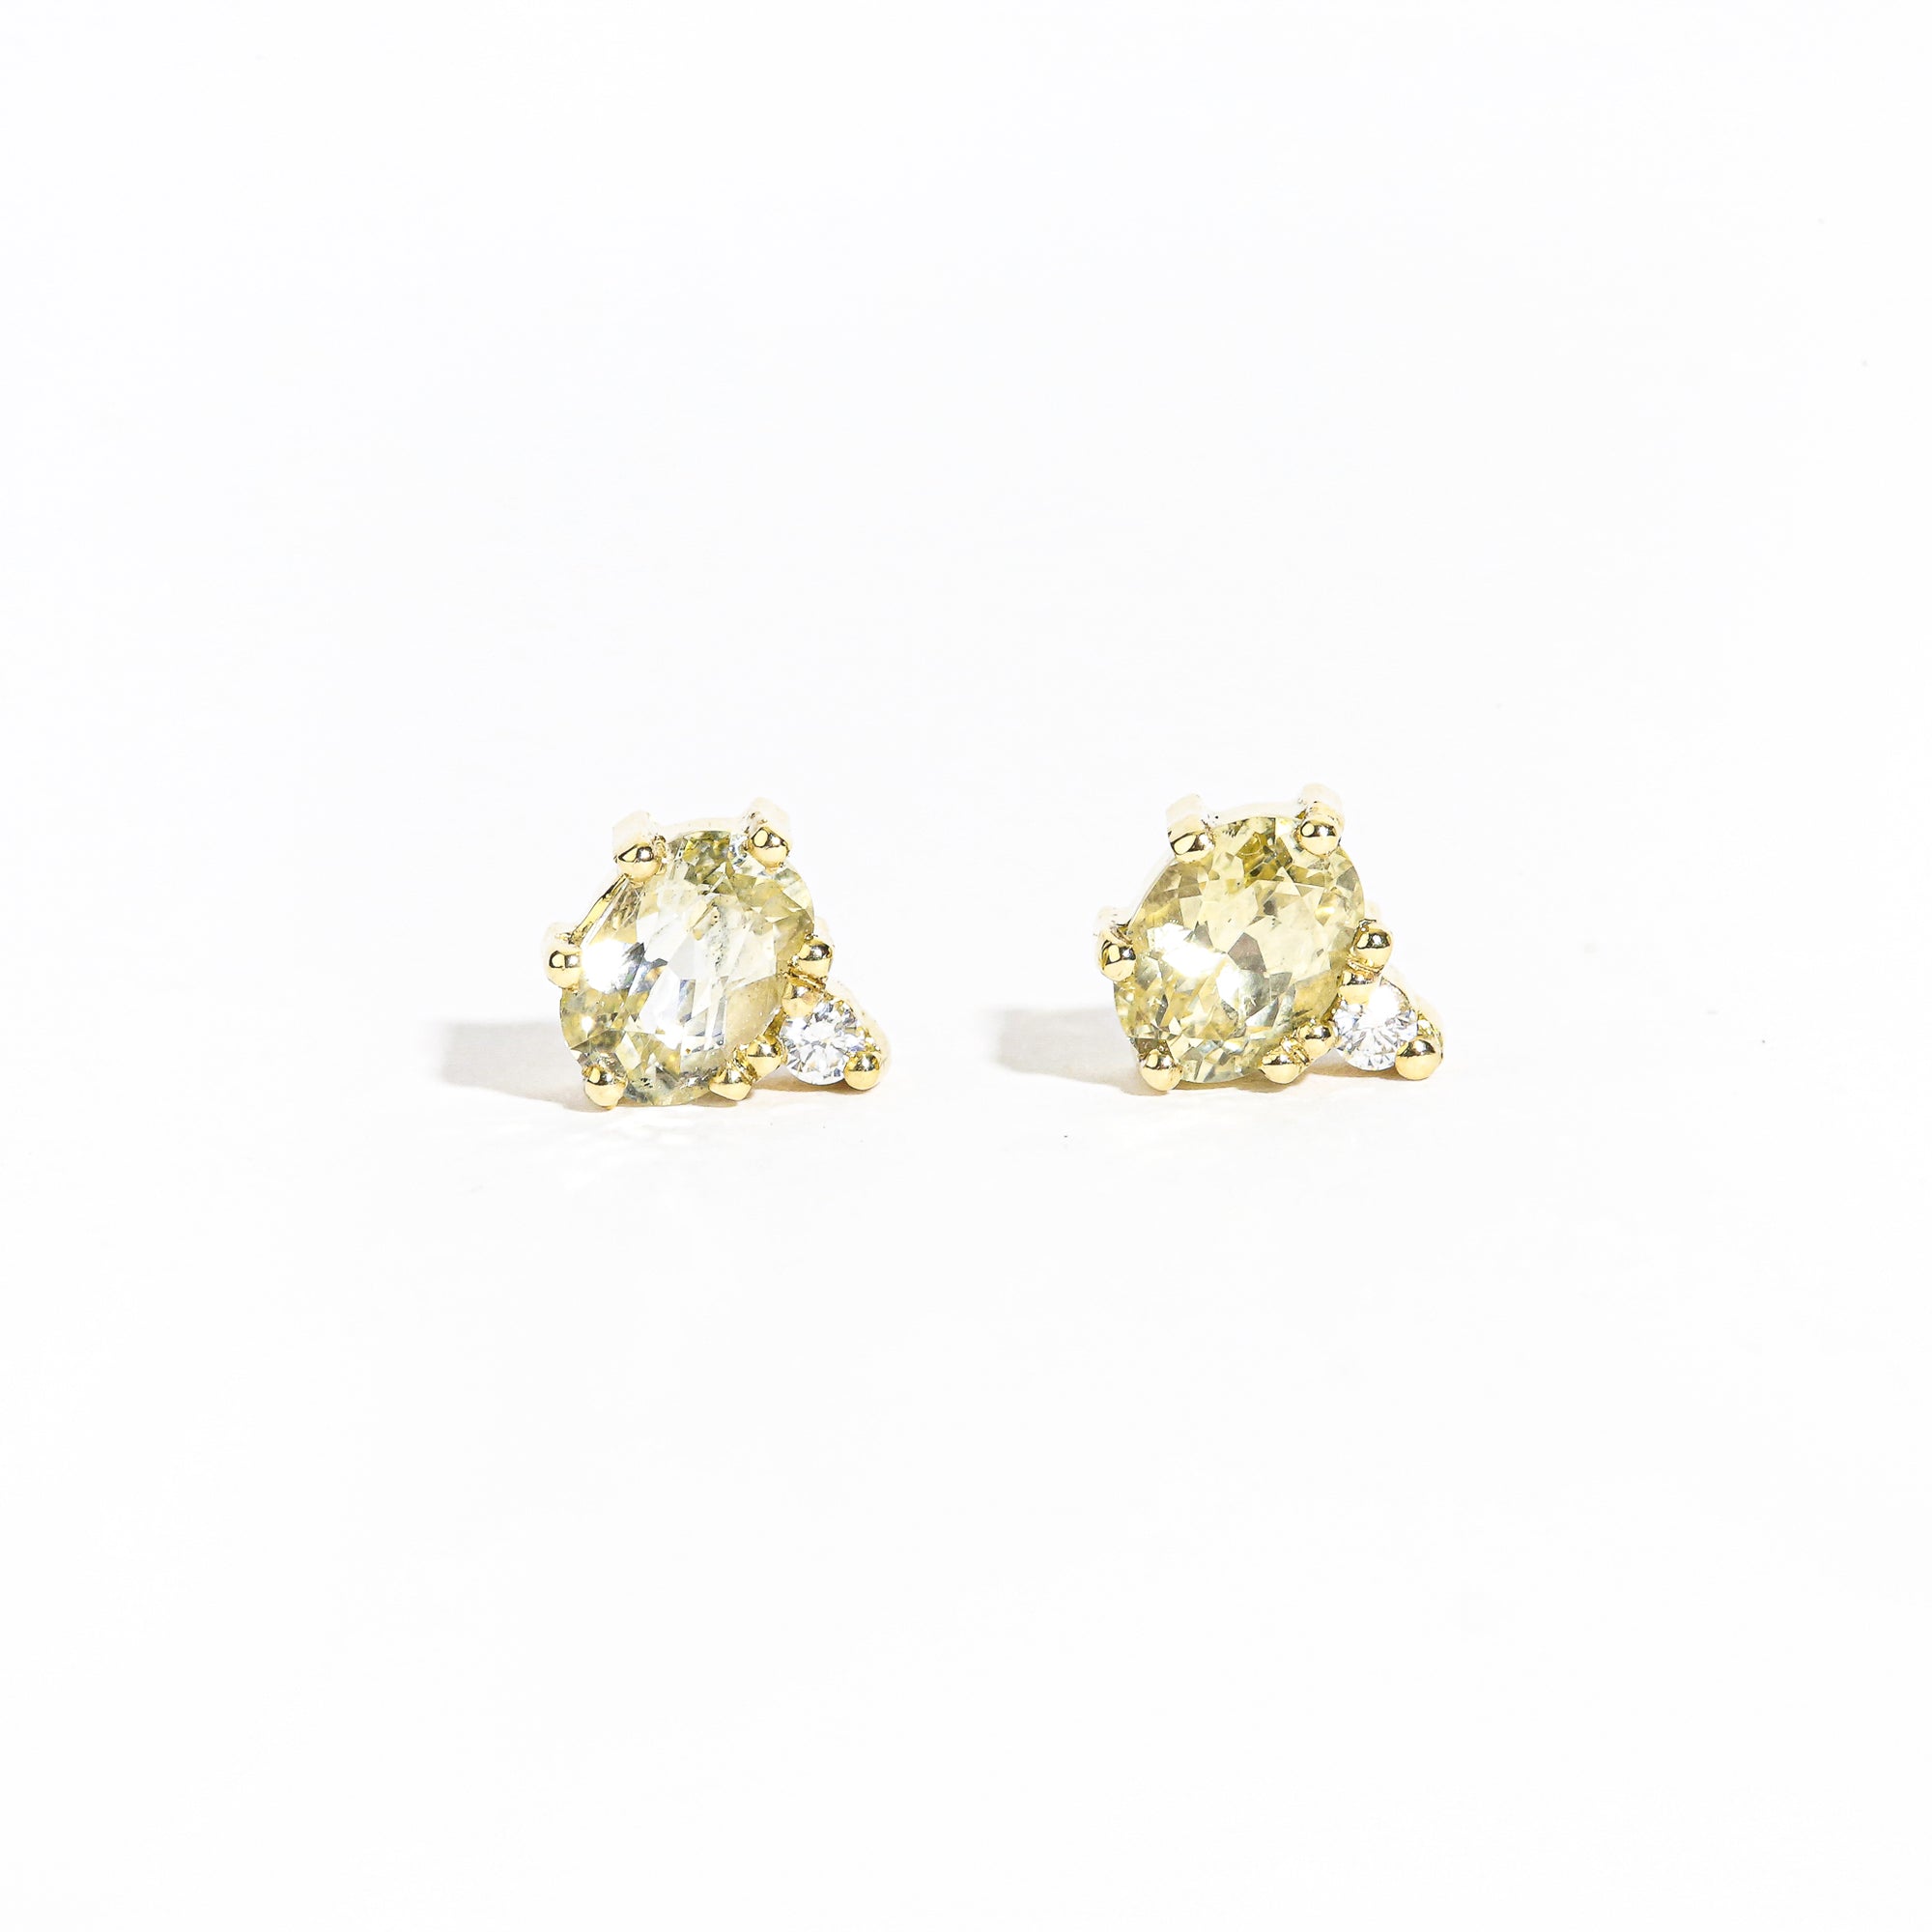 Yellow sapphire and white diamond earrings crafted in 9ct yellow gold by Black Finch